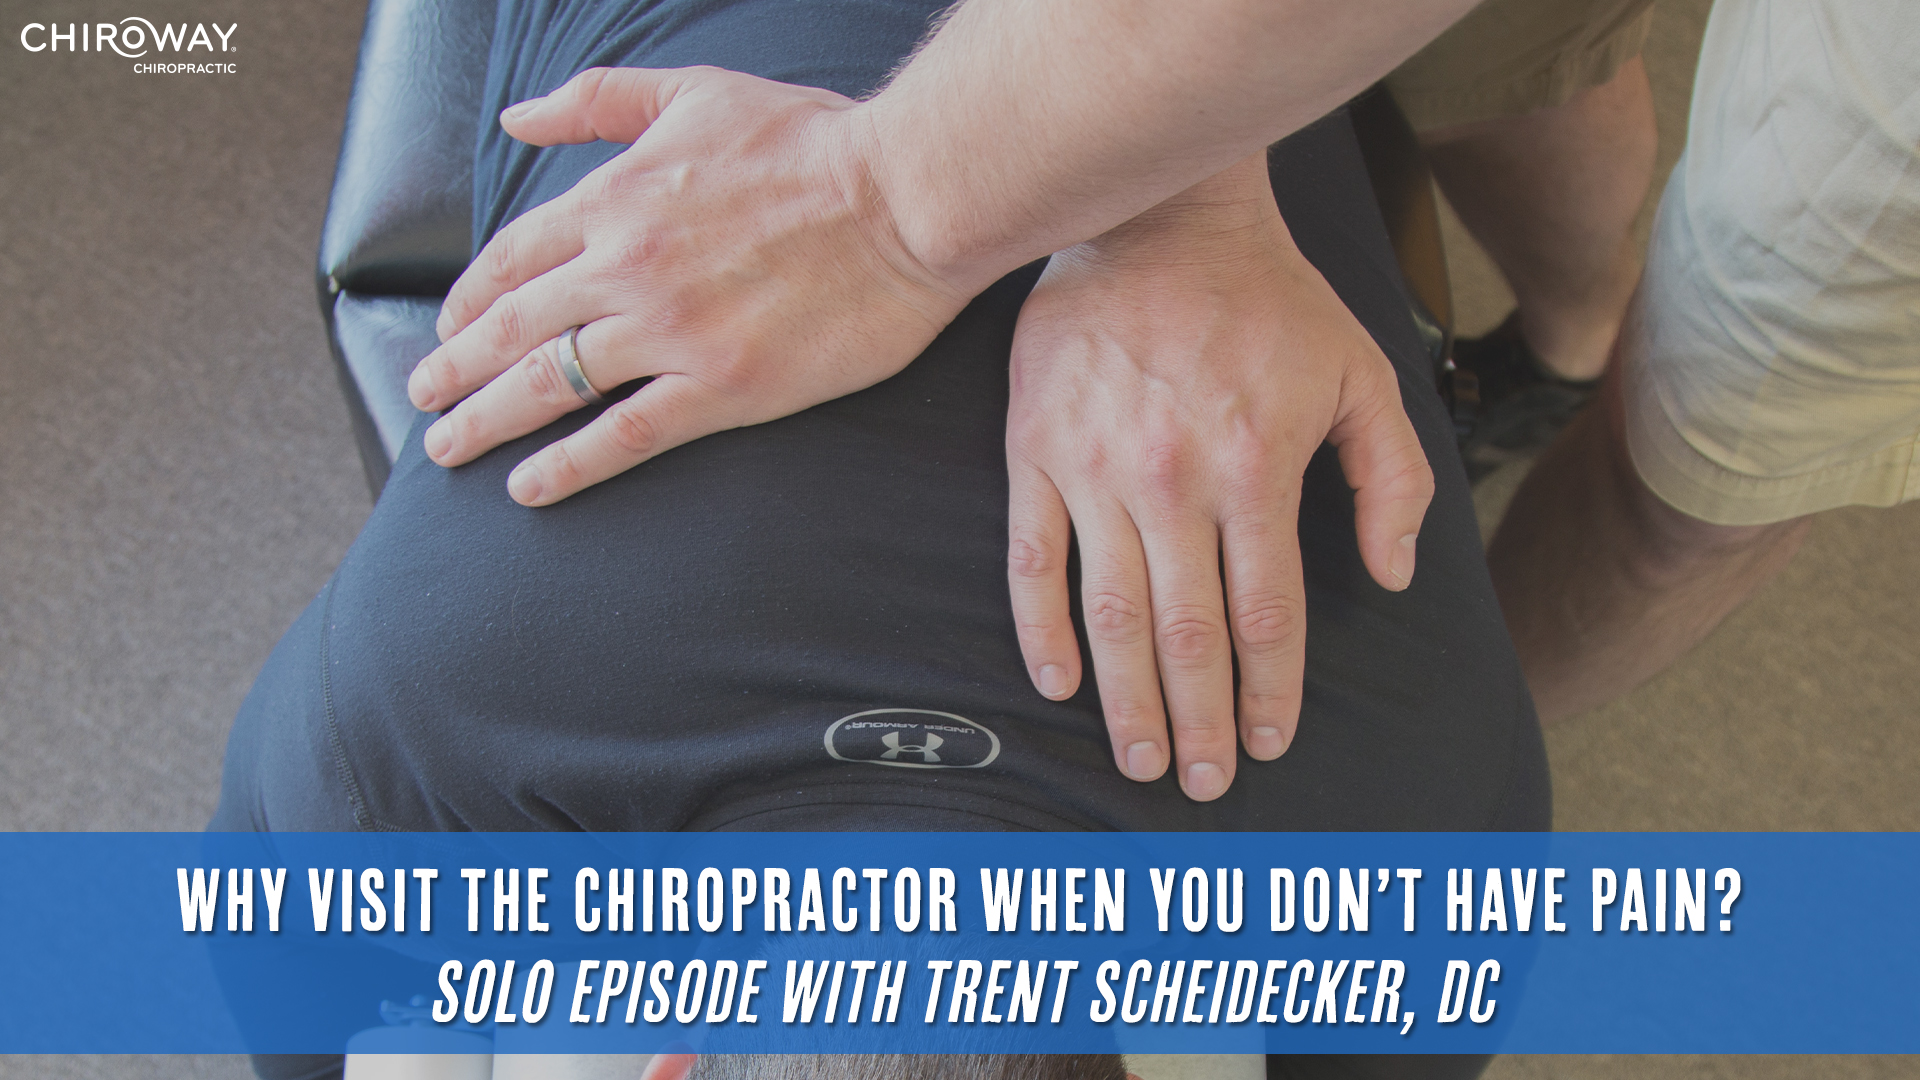 Why Visit the Chiropractor When You Don’t Have Pain?